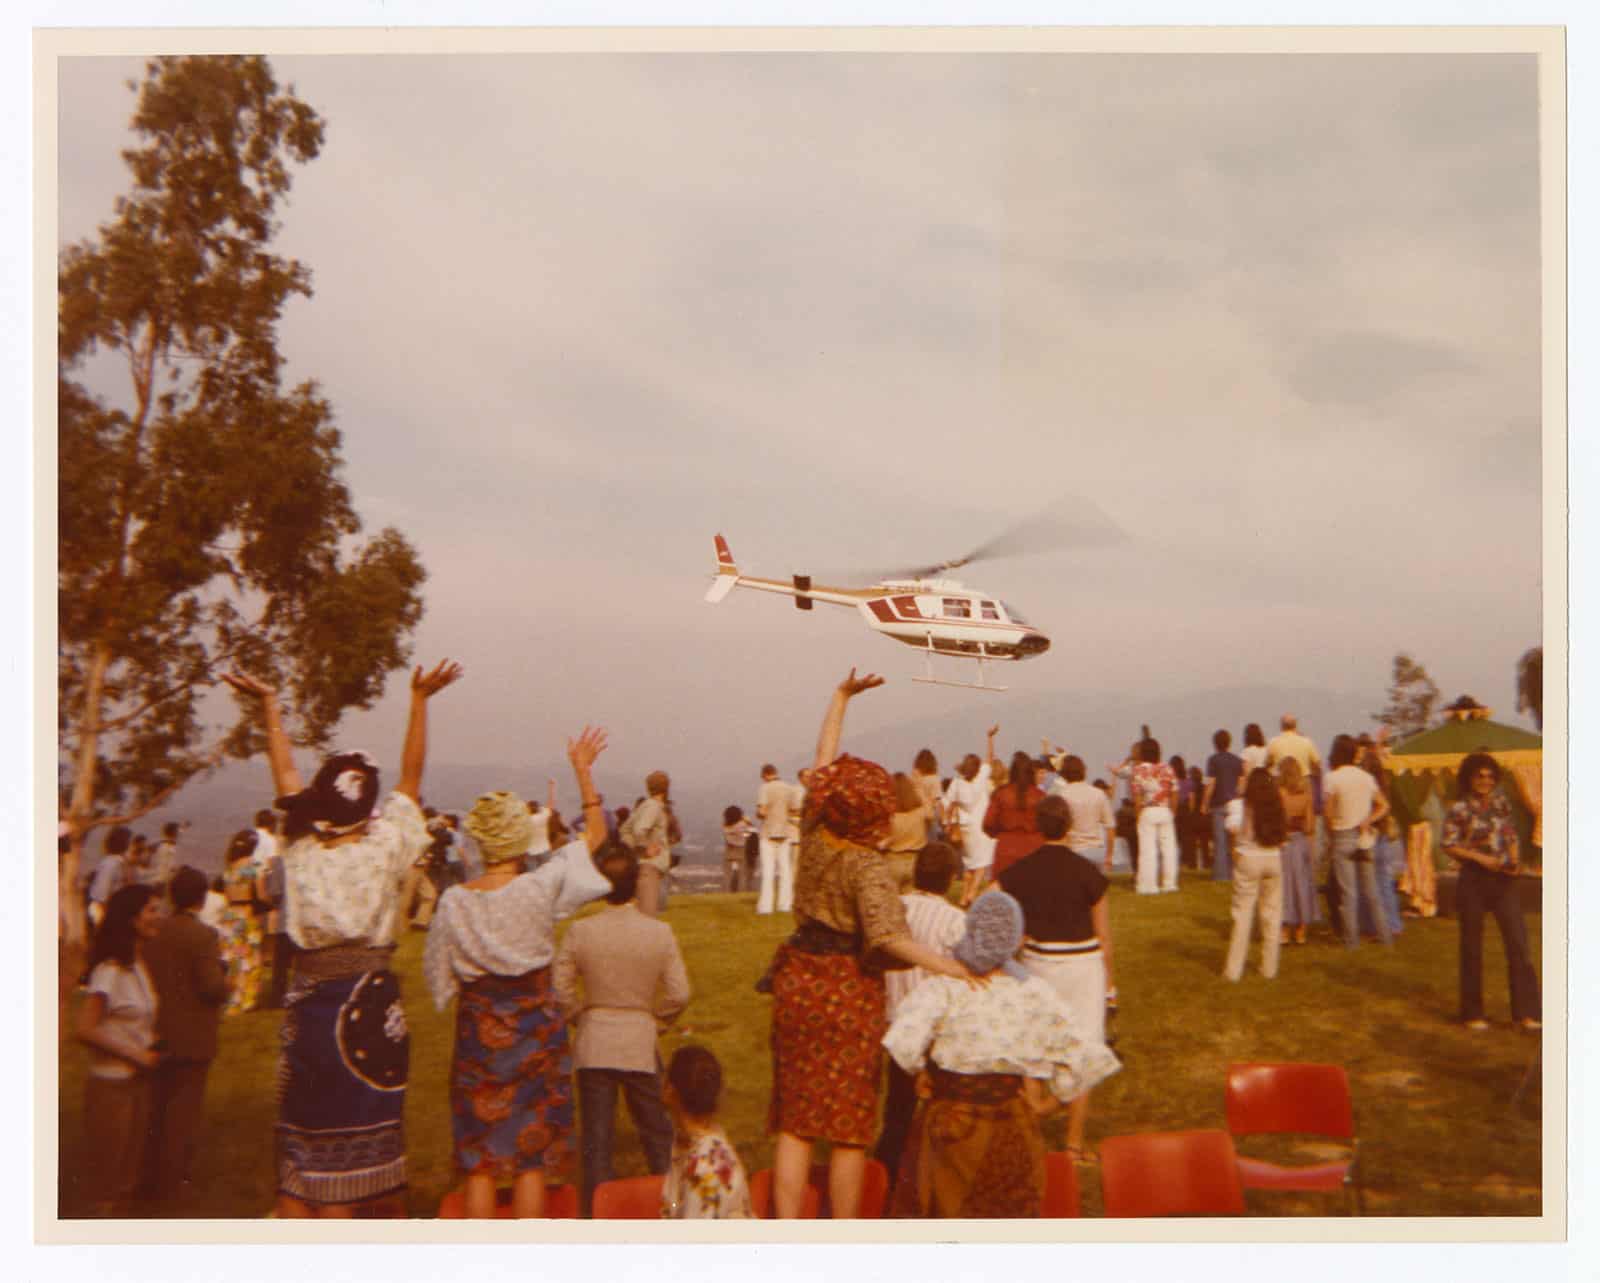 Group of people on lawn waving at helicopter